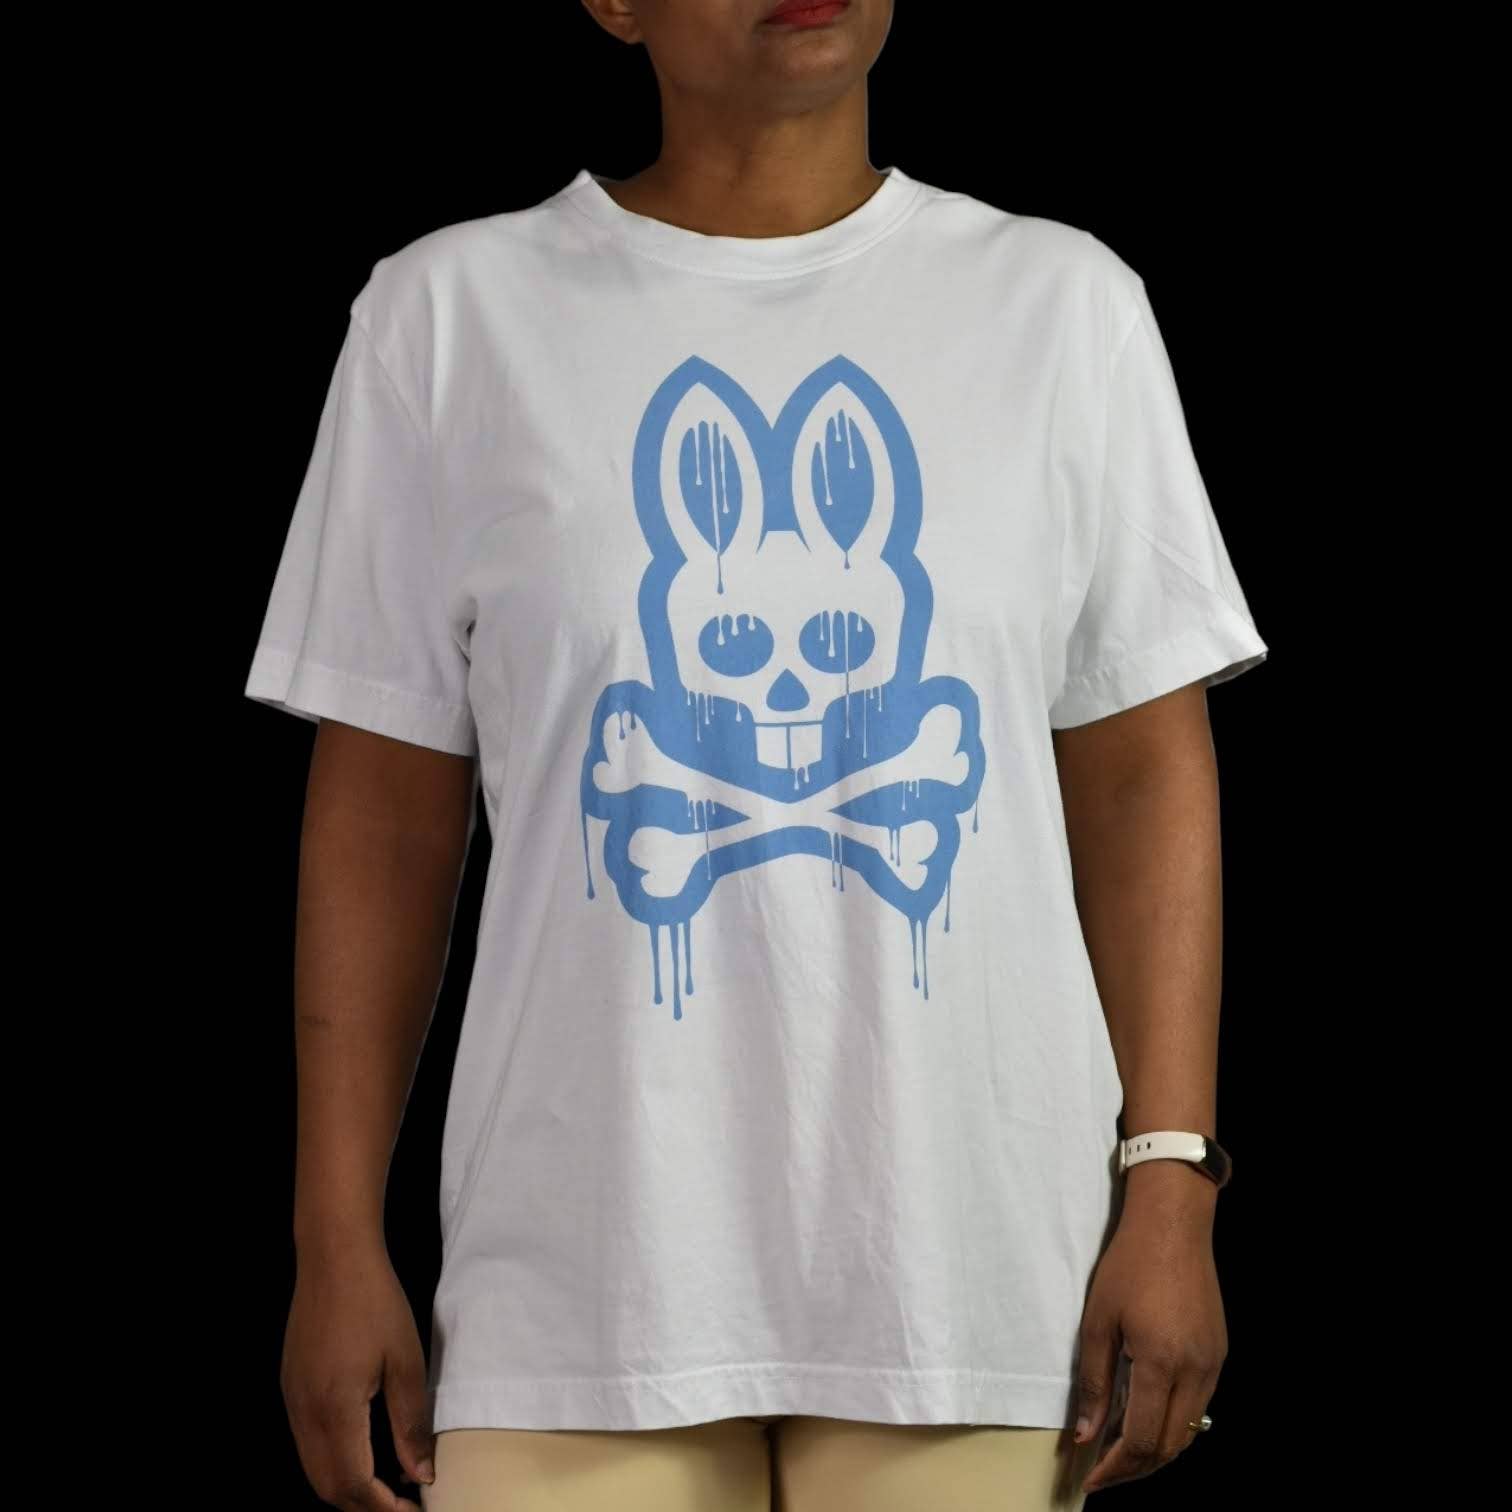 Psycho Bunny Tee Shirt Dripping Graphic White Blue Crew Neck Short Sleeve Size Small Mens